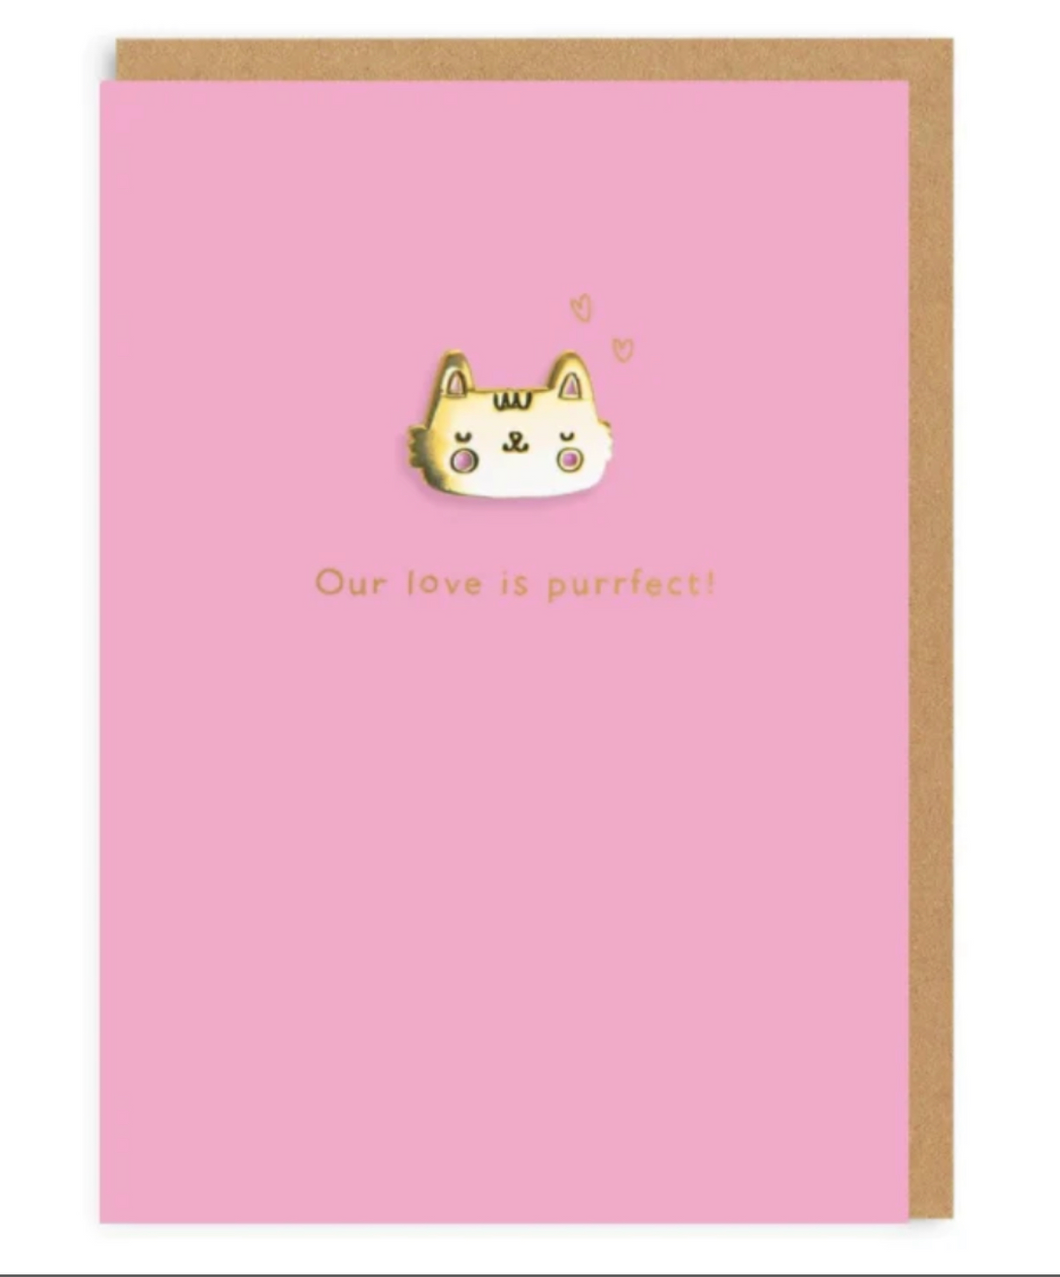 Our love is purrfect Greeting Card by OHH DEER